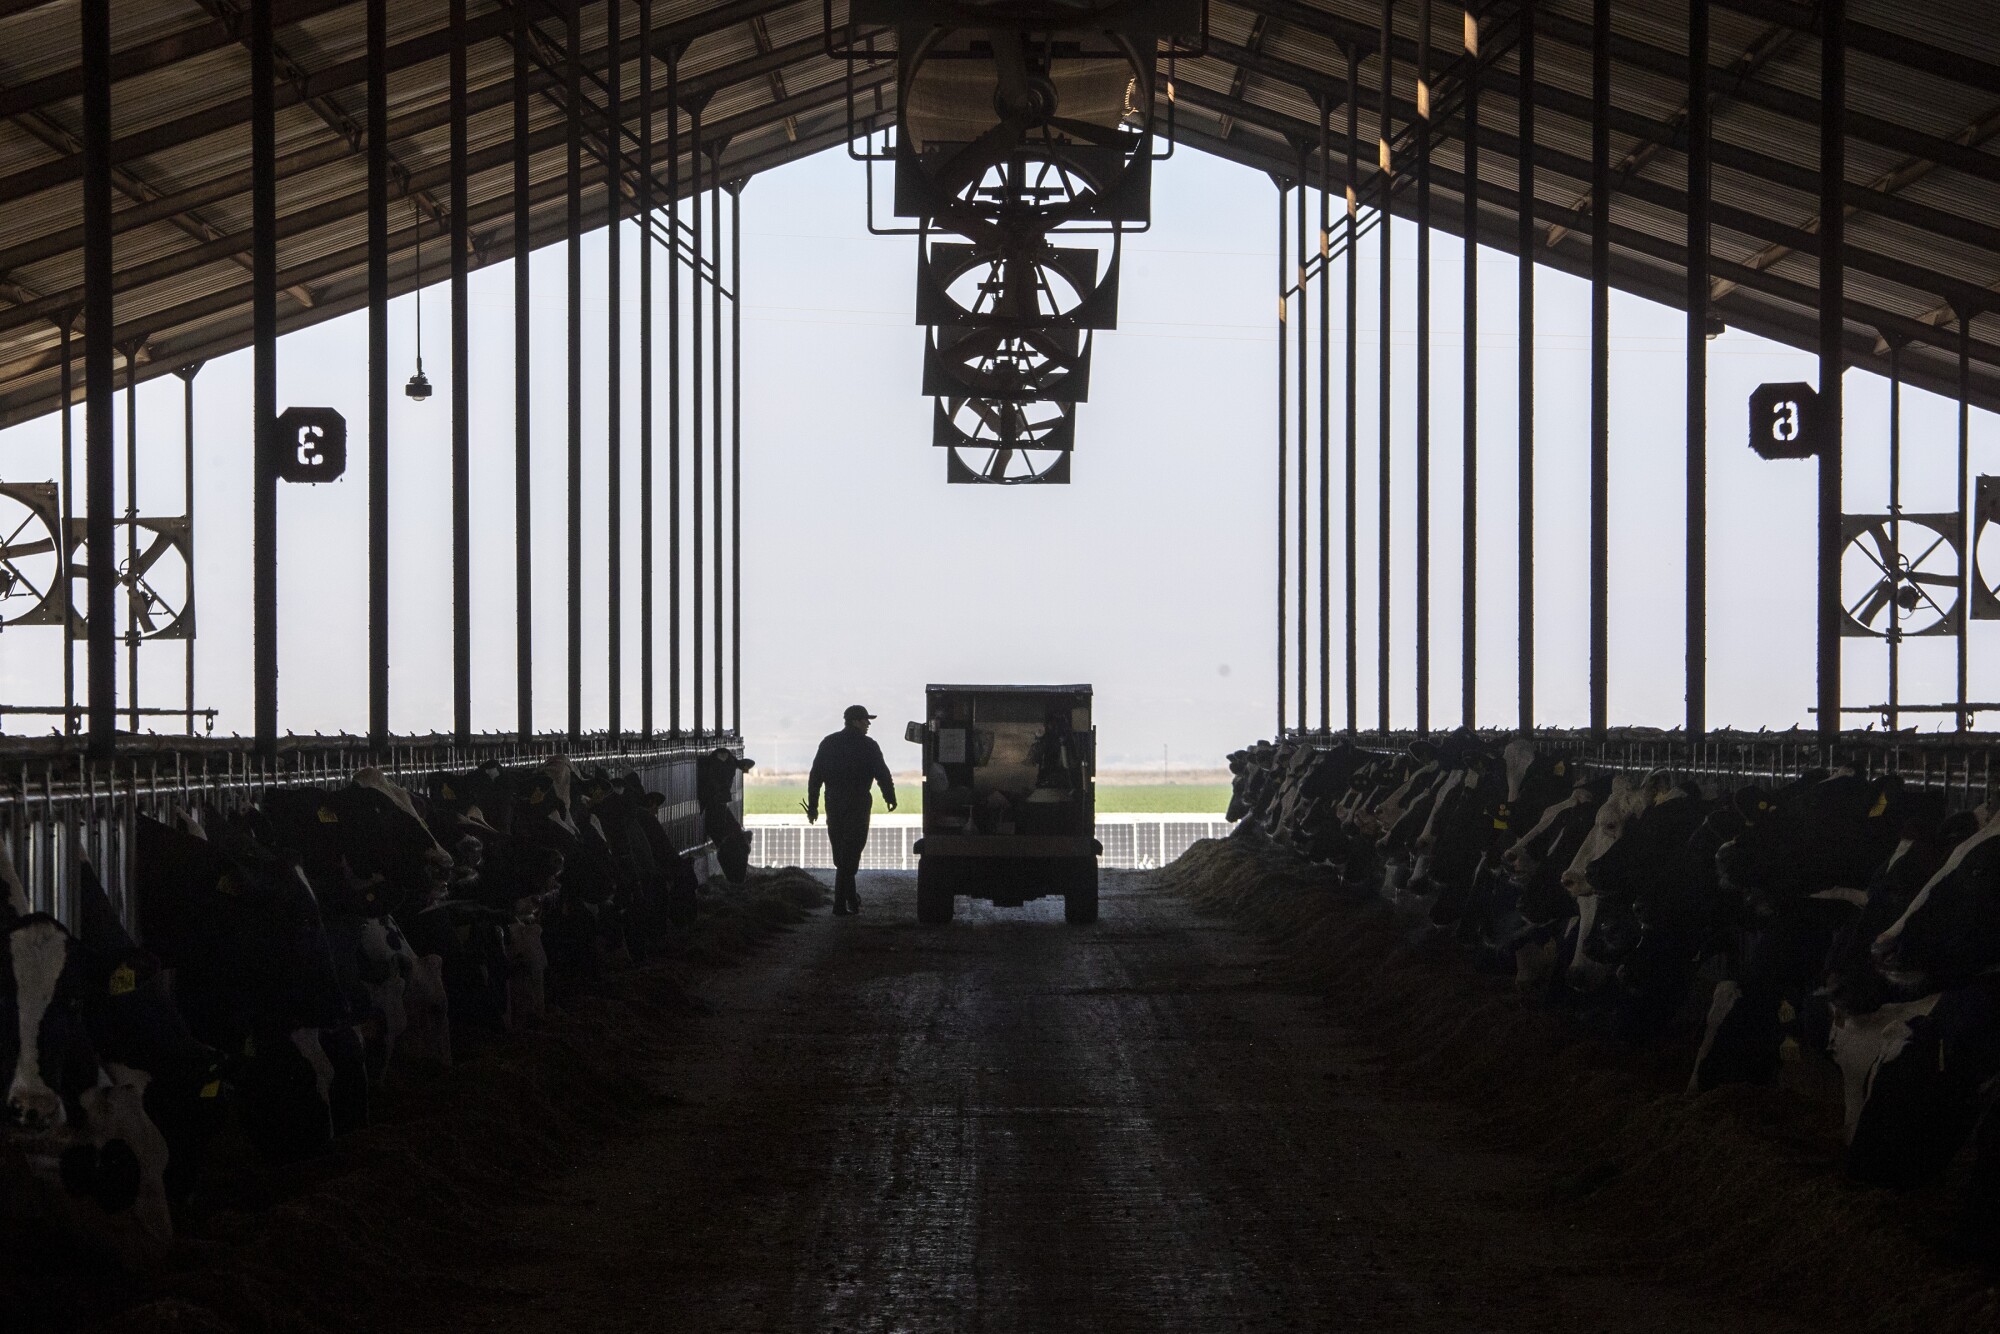 A worker and truck are silhouetted at the entrance to a dairy barn. 